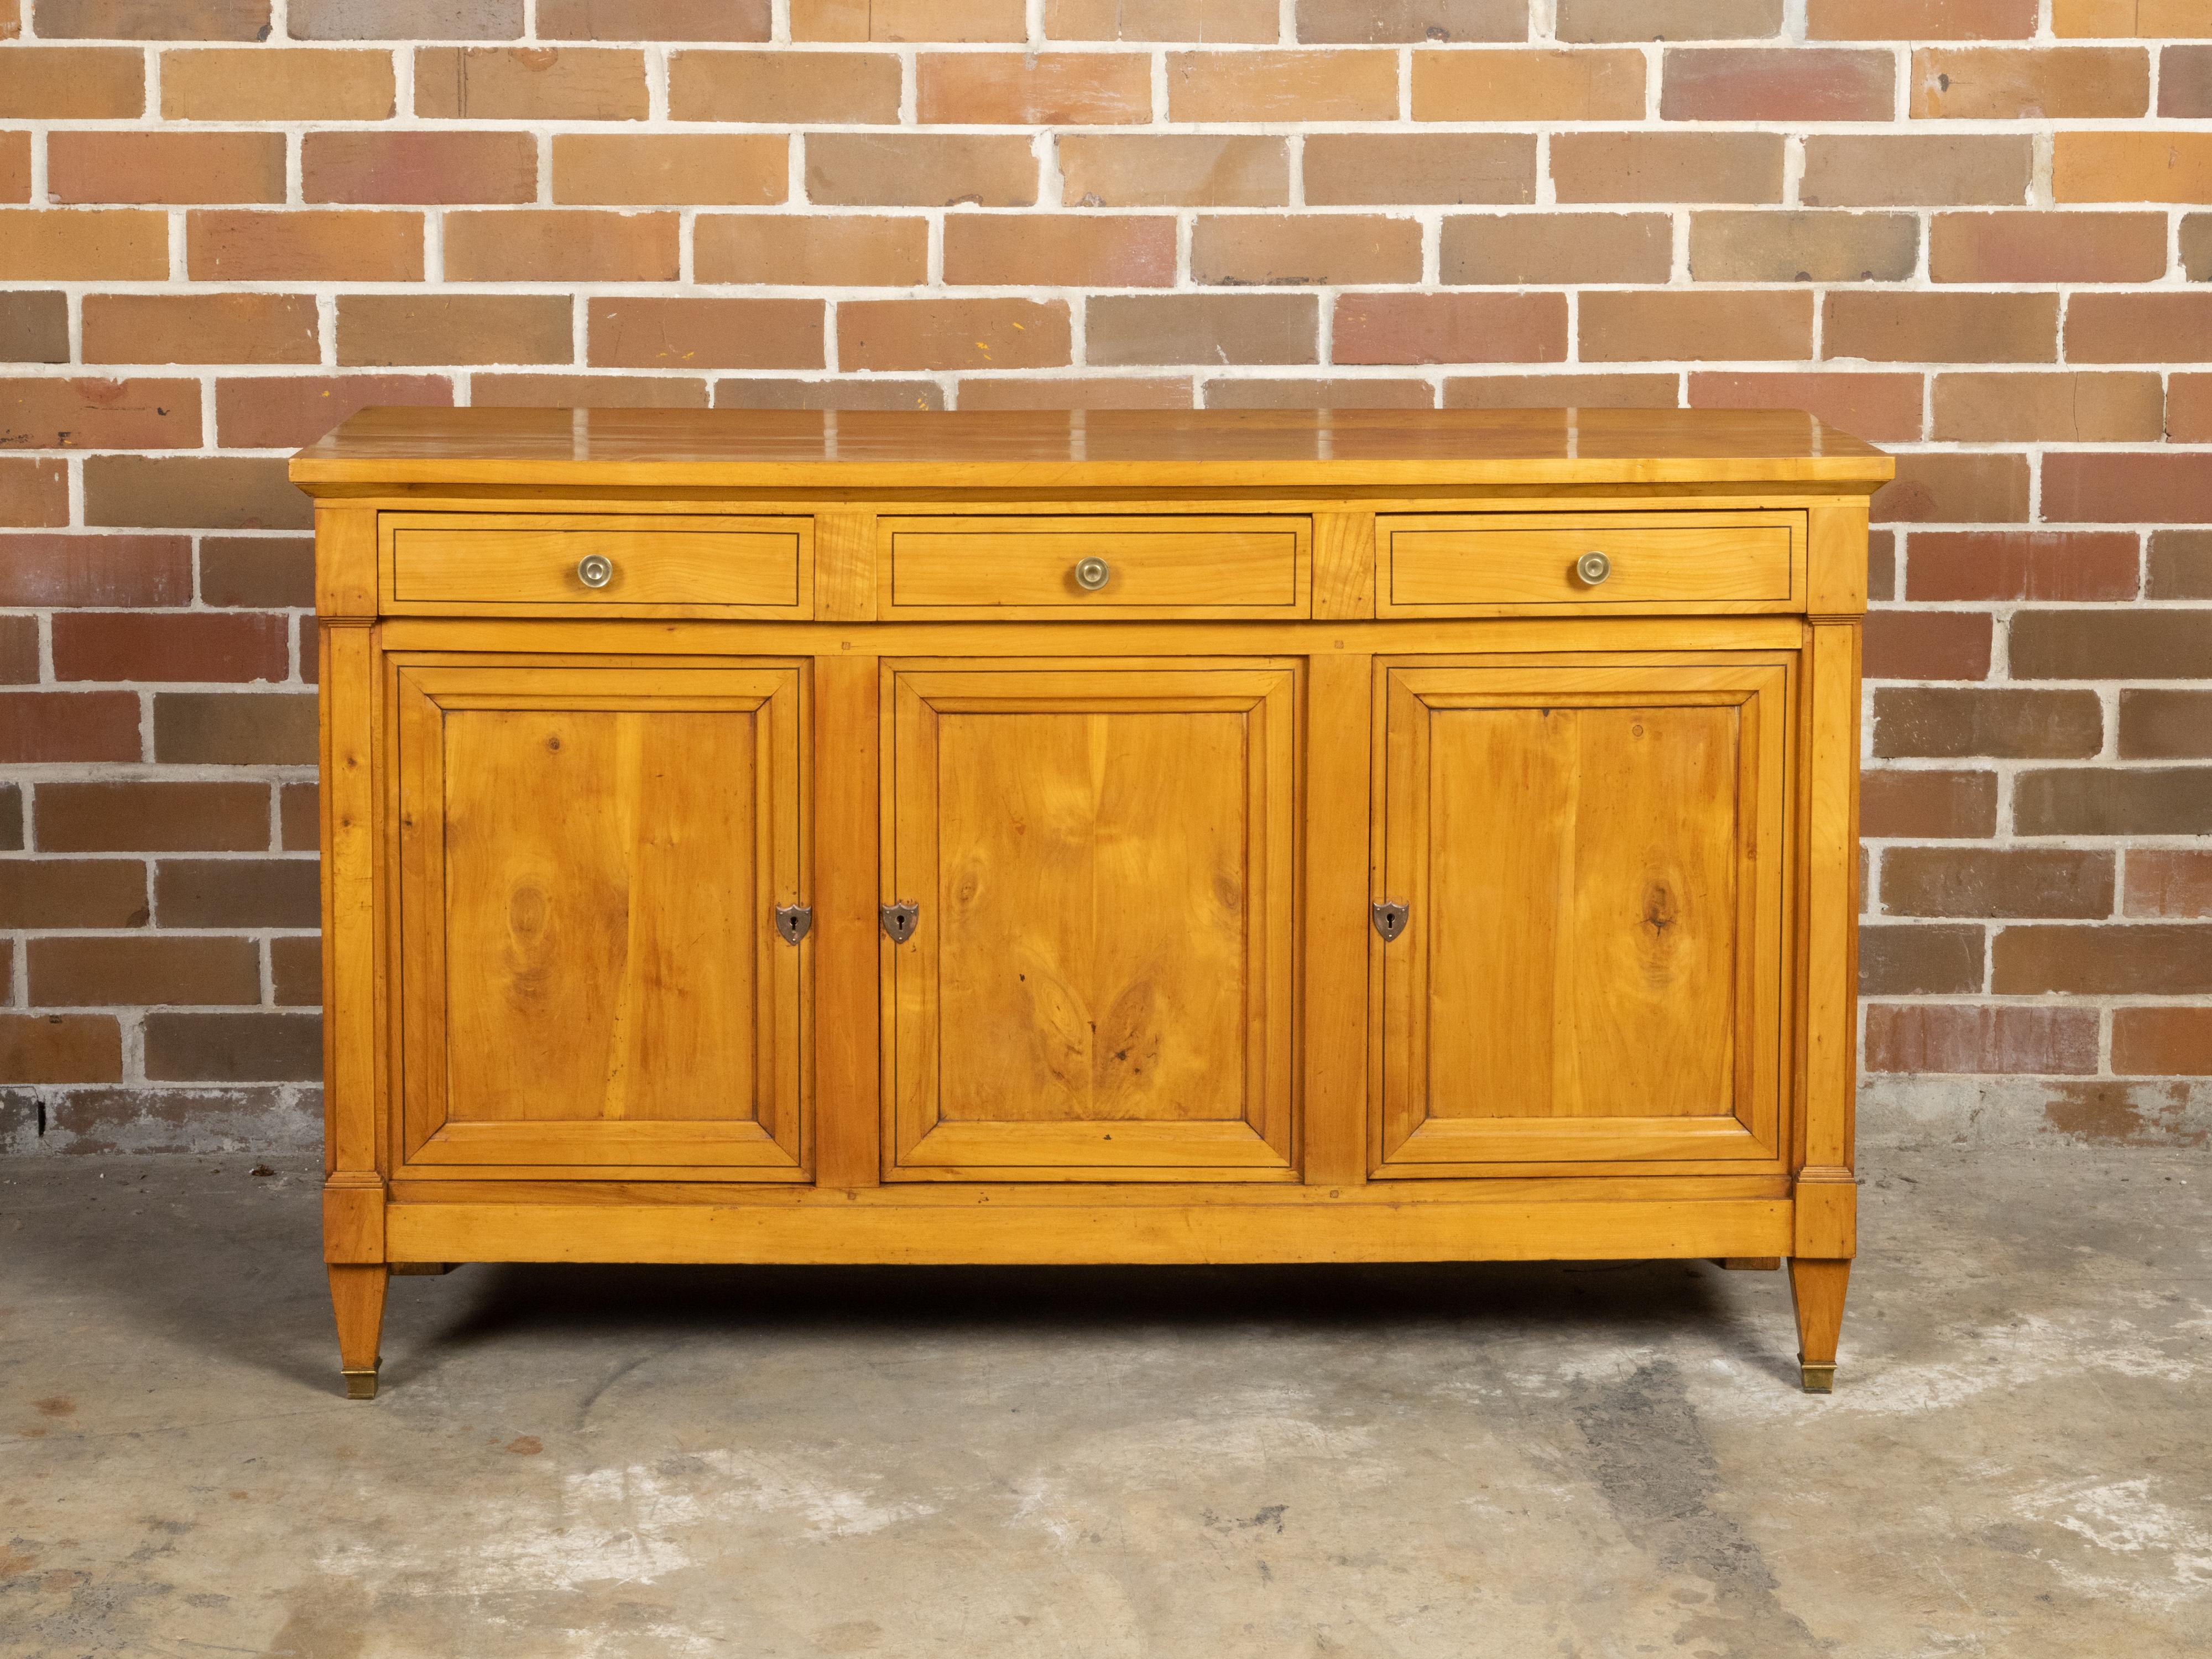 A French Turn of the Century walnut buffet from the early 20th century, with three drawers over three doors, brass pulls and feet, pilaster motifs, banding and tapered legs. Created in France during the Turn of the Century which saw the transition